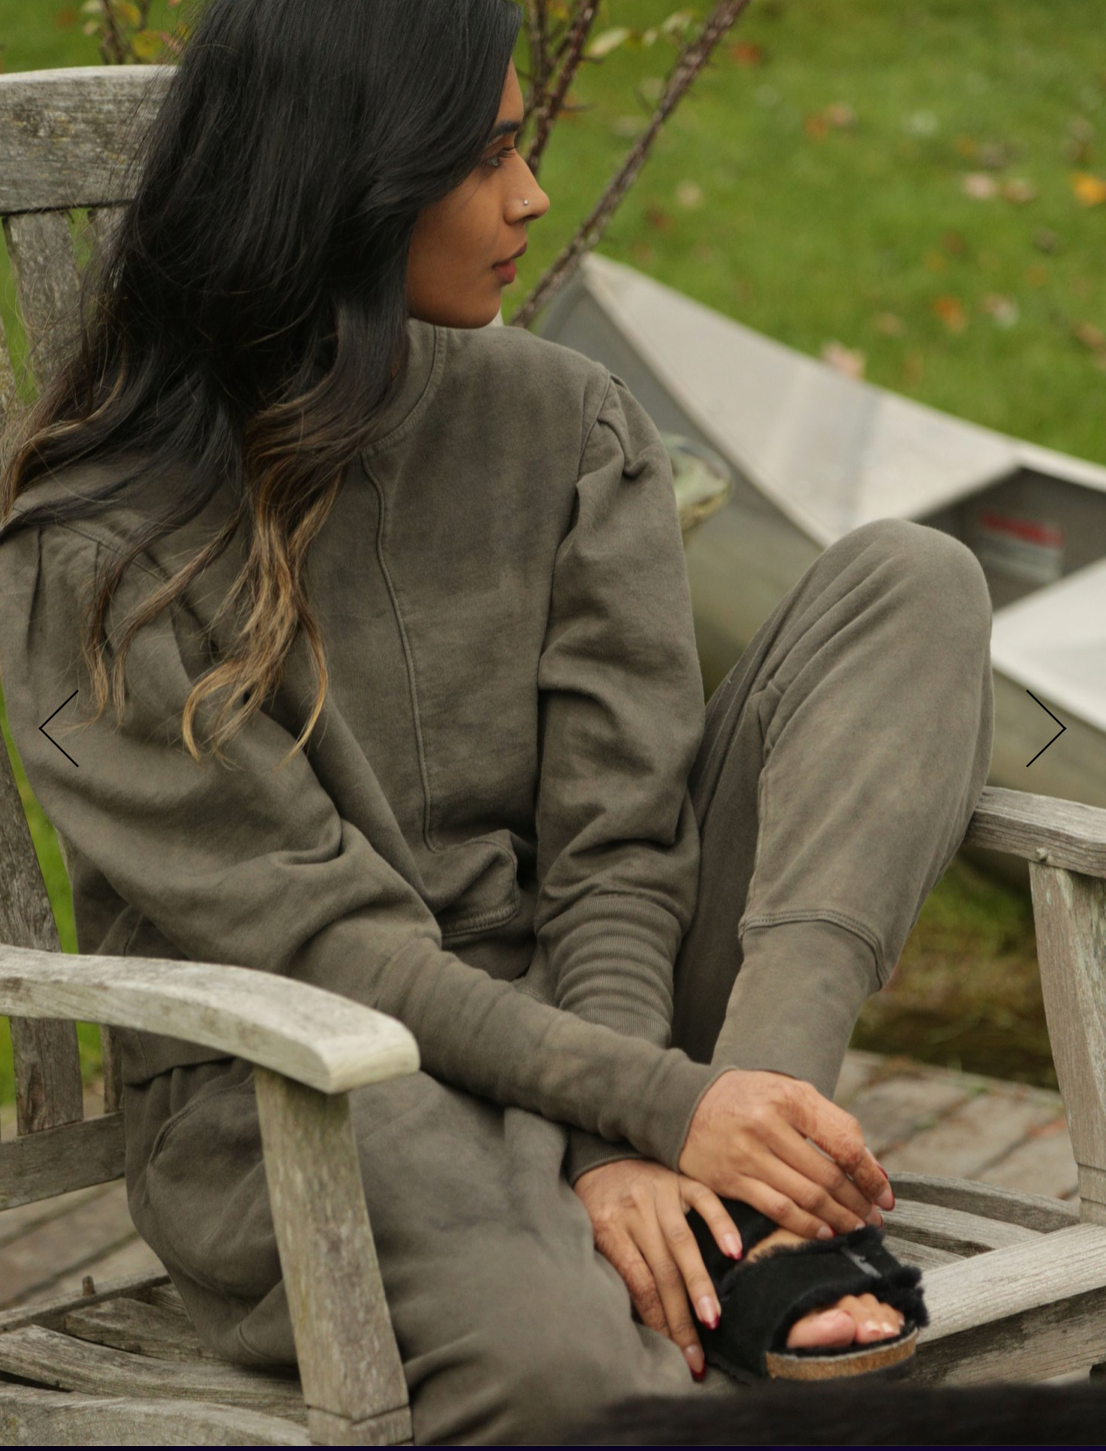 The Acorn Dyed Sweatpant - THE WAIGHT